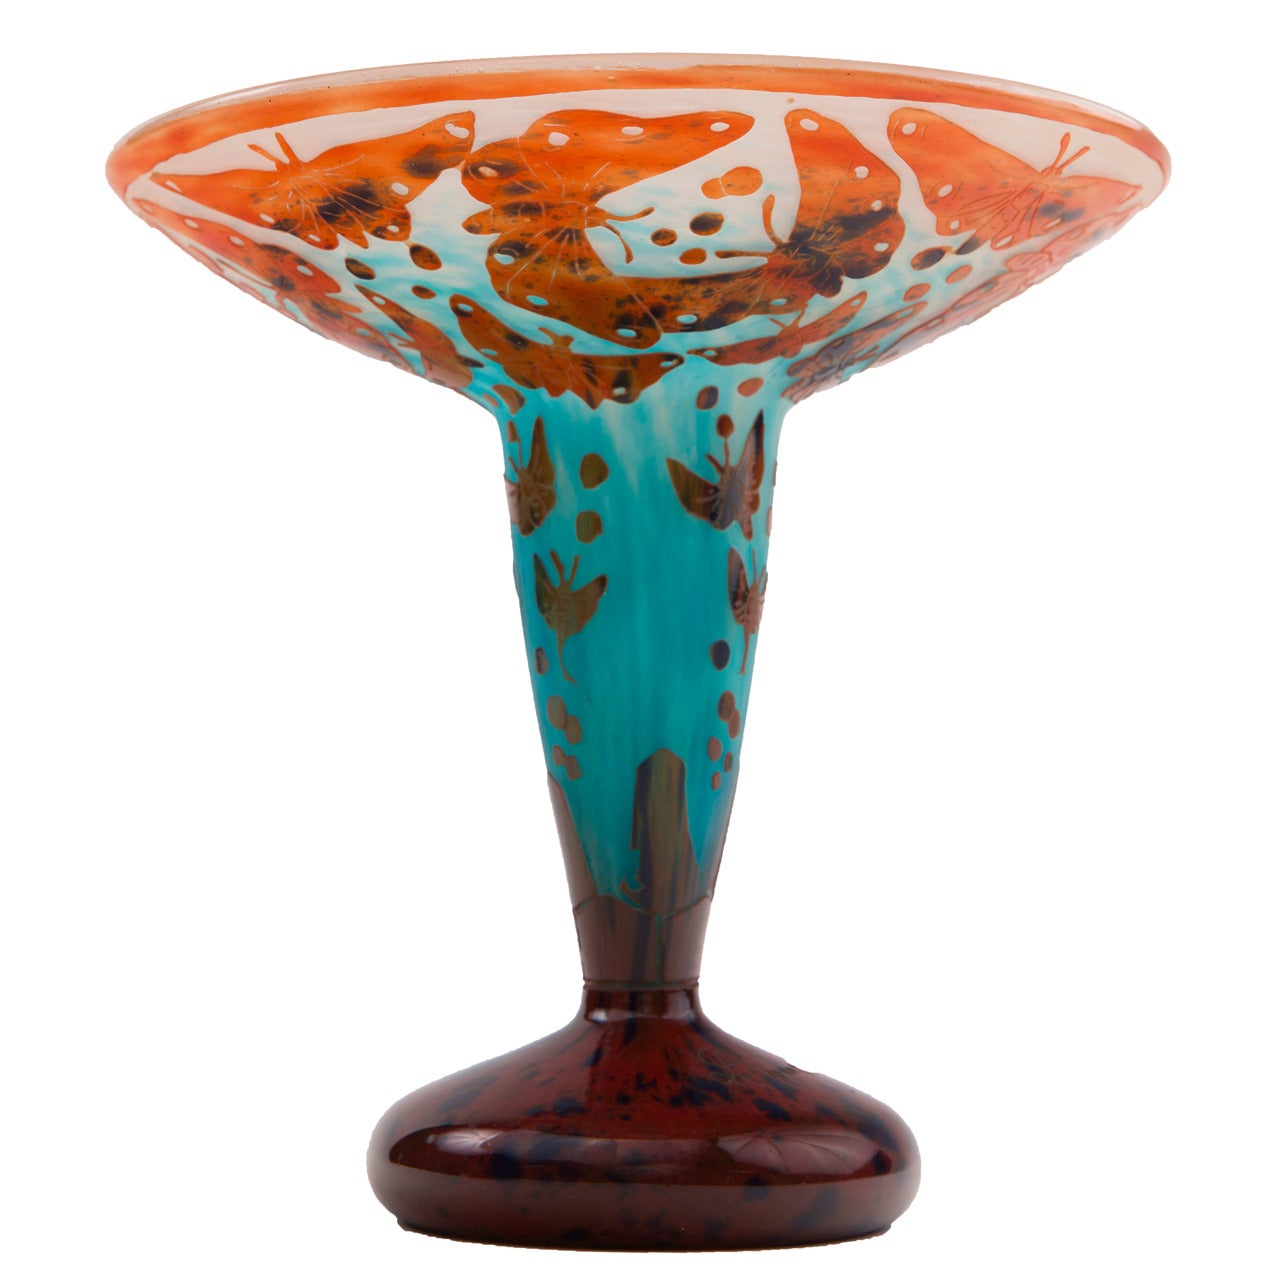 Papillons Vase by Charles Schneider for Le Verre Francias